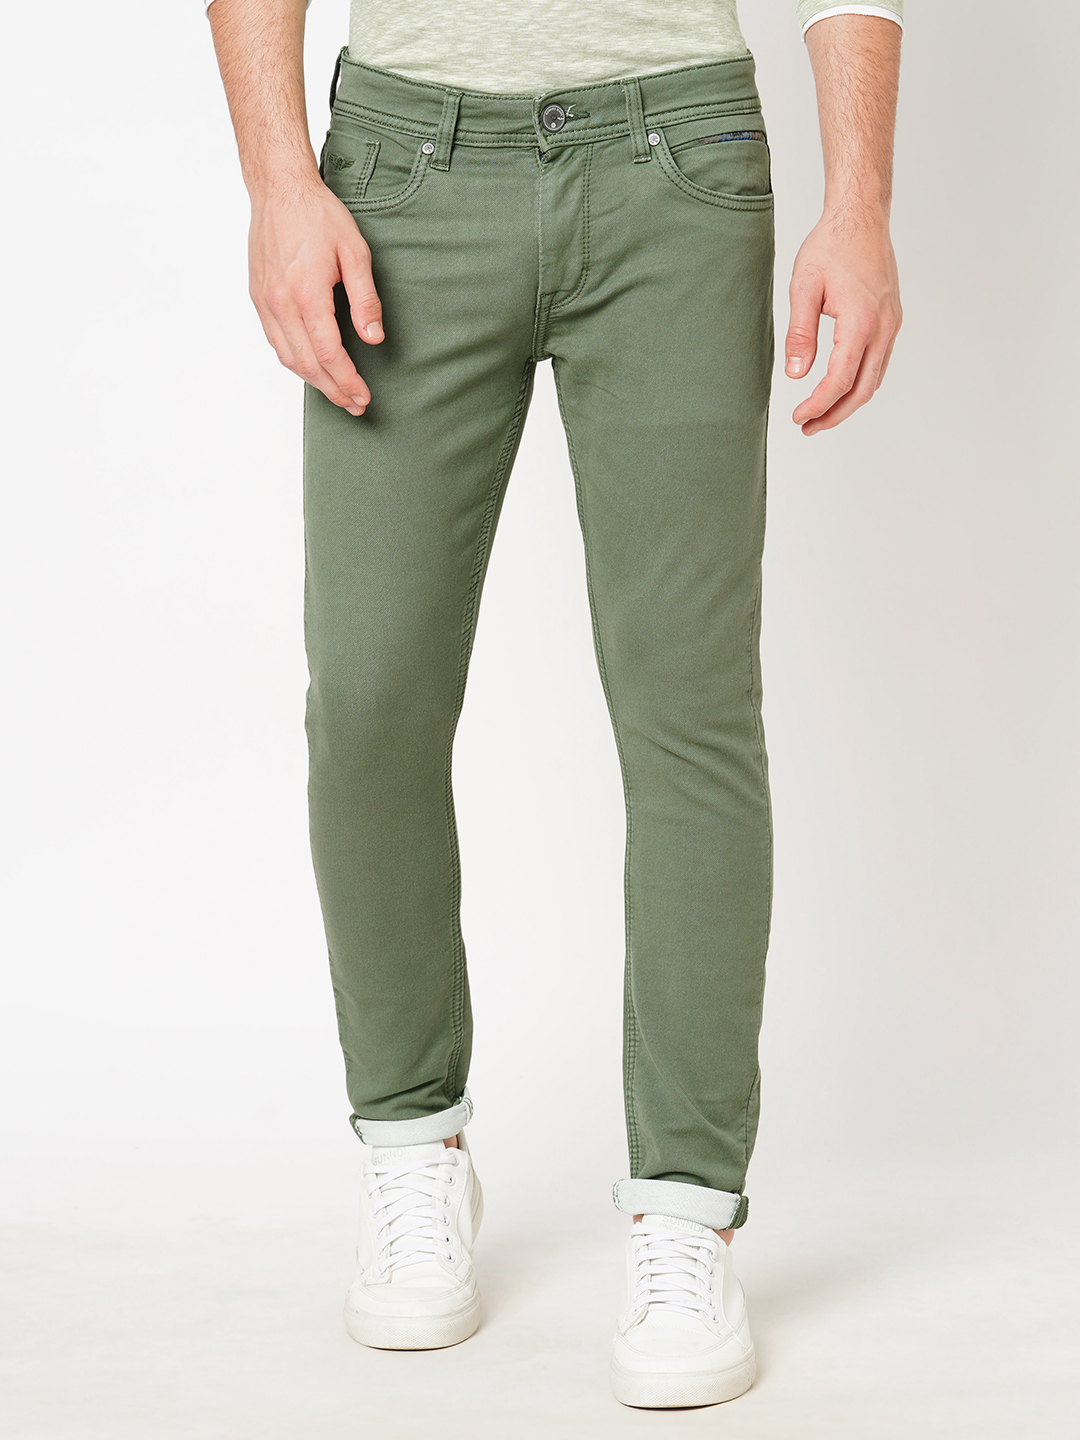 MINT GREEN 5 POCKET LOW-RISE ANKLE LENGTH JEANS (SPRINGSTEEN FIT